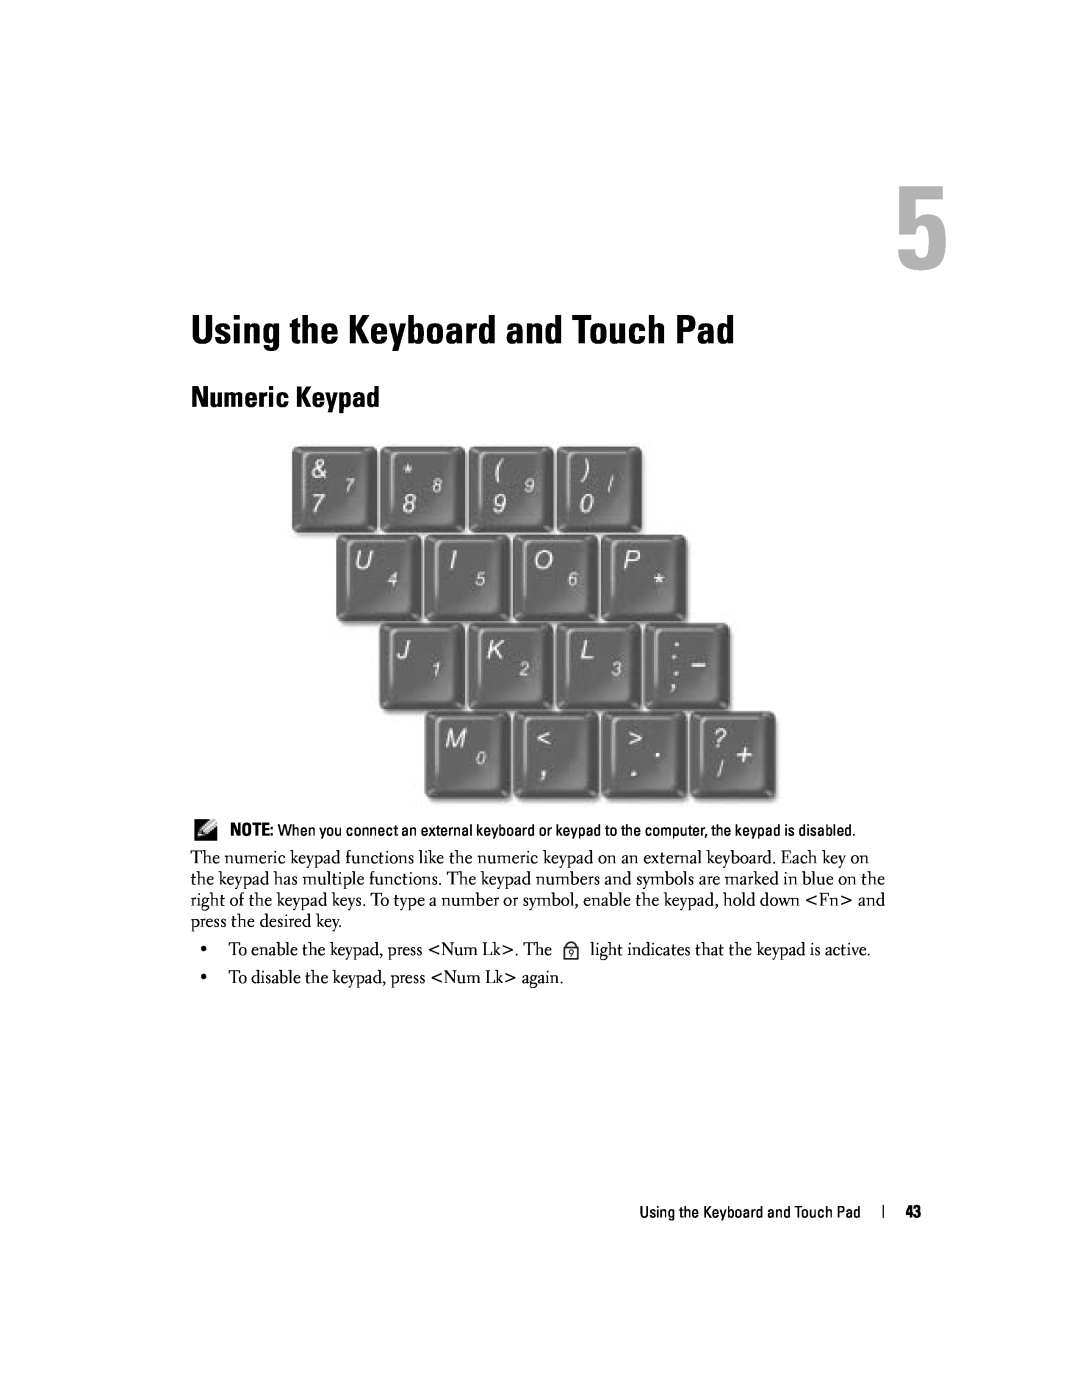 Dell PP10L owner manual Using the Keyboard and Touch Pad, Numeric Keypad 